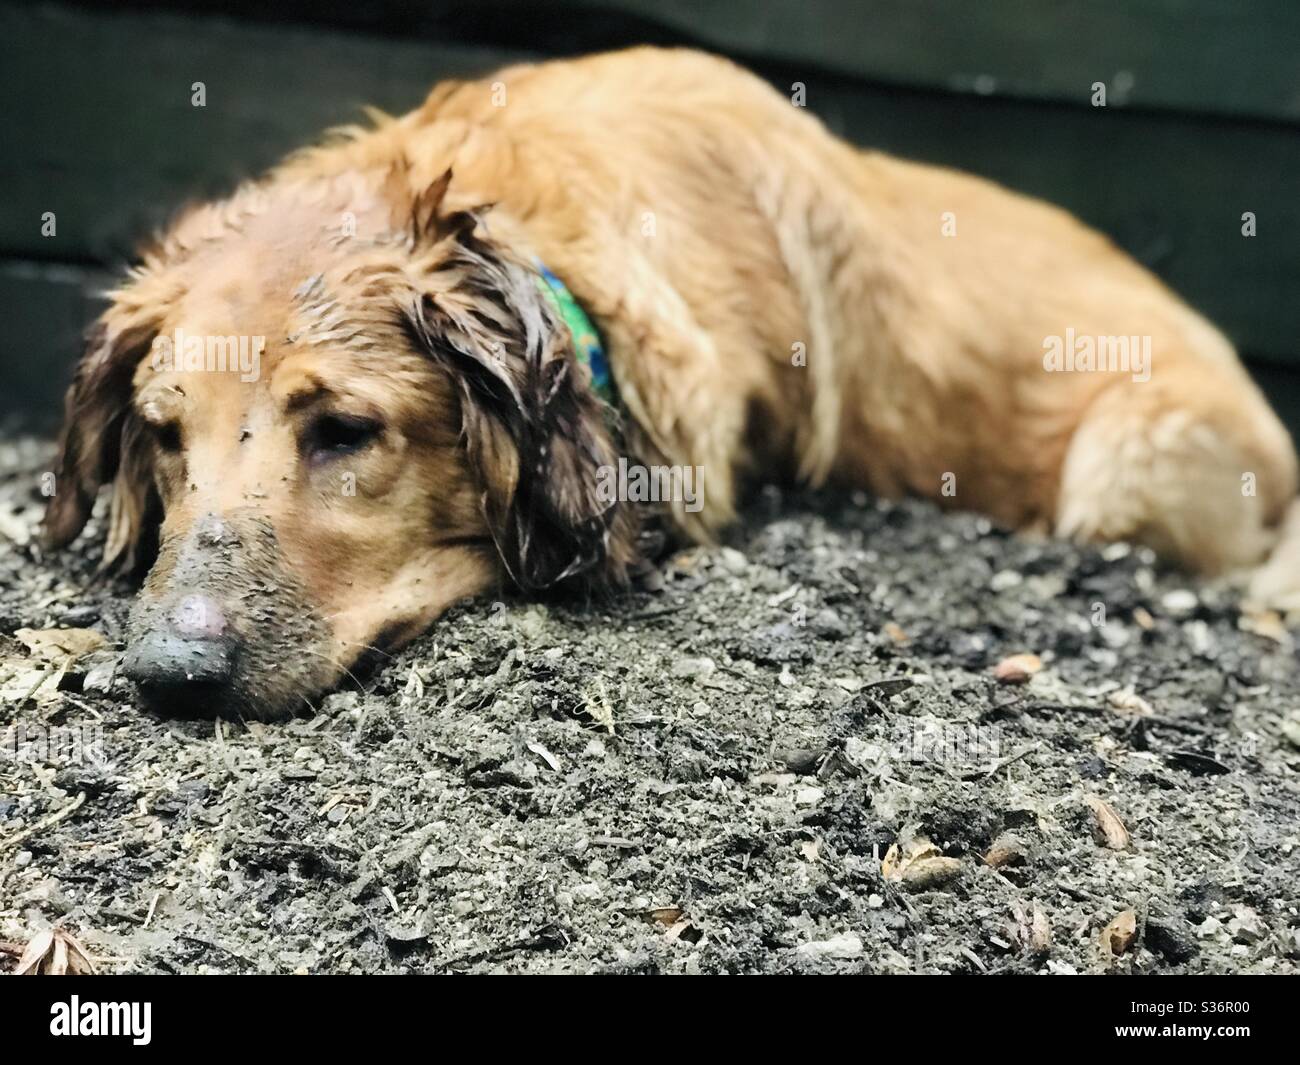 A golden retriever dog lays in the mud with muddy ears and a muddy nose. Stock Photo